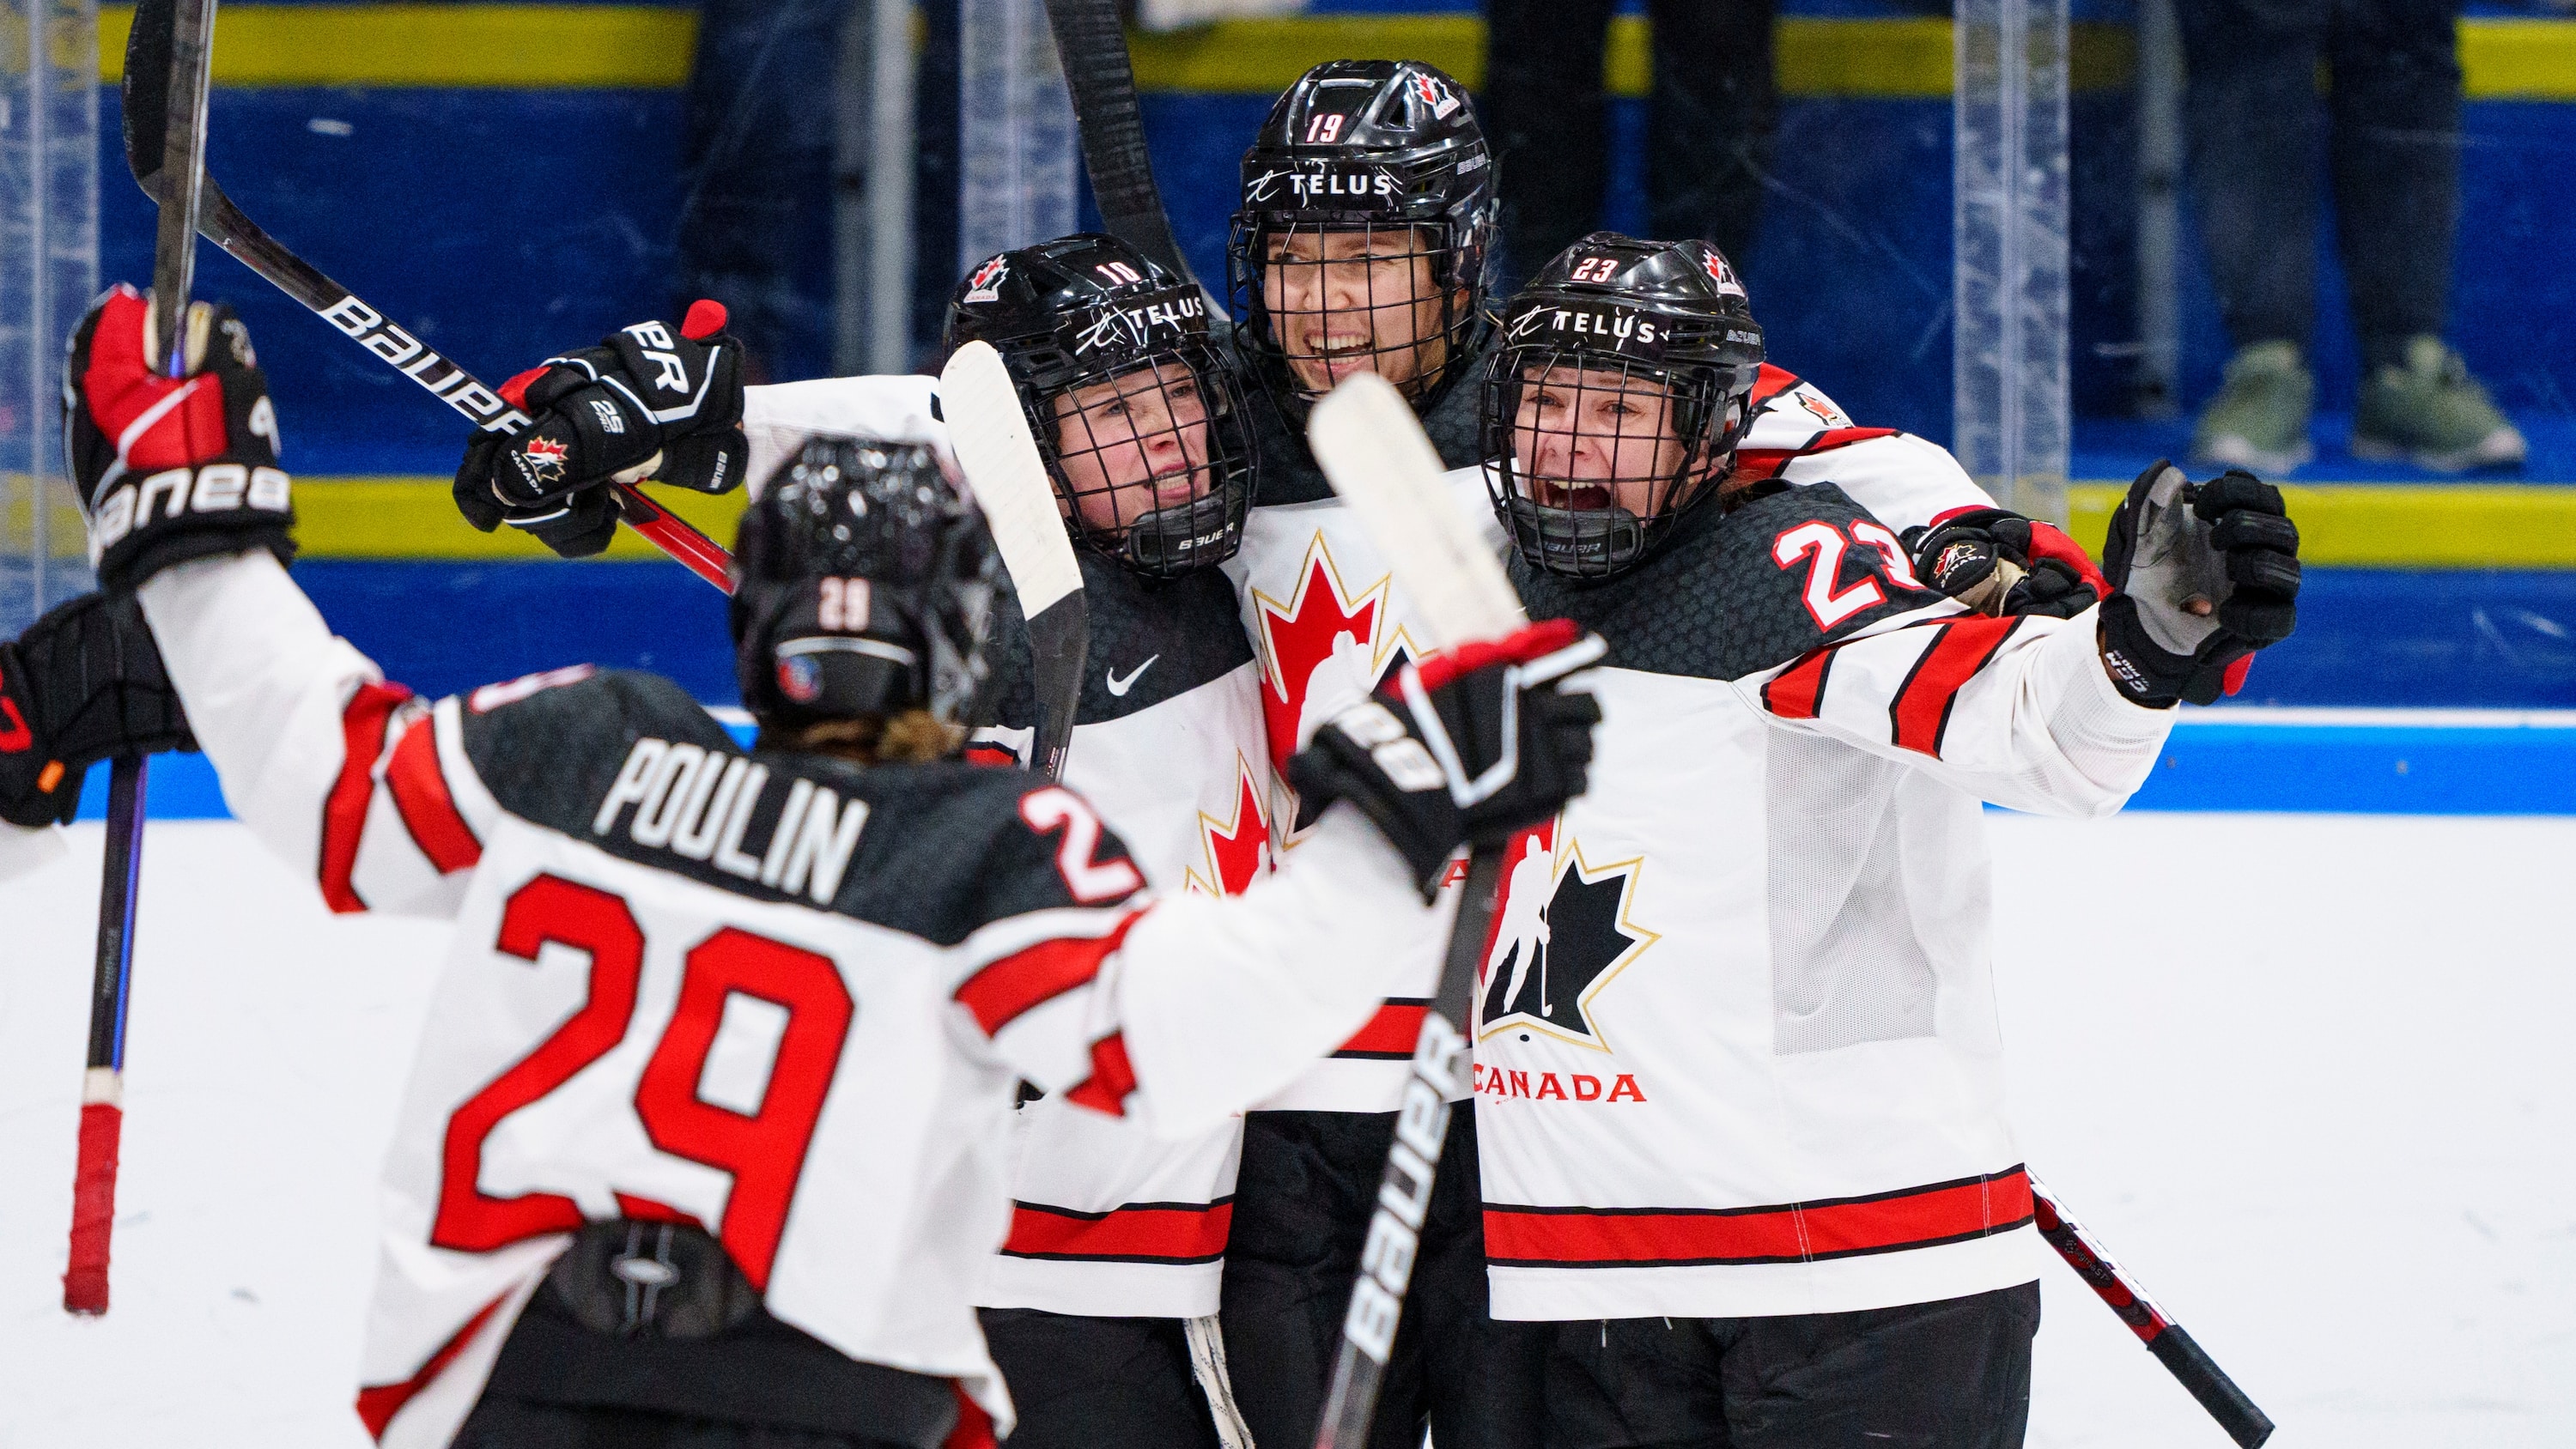 canada defeats u s to capture gold at womens hockey worlds